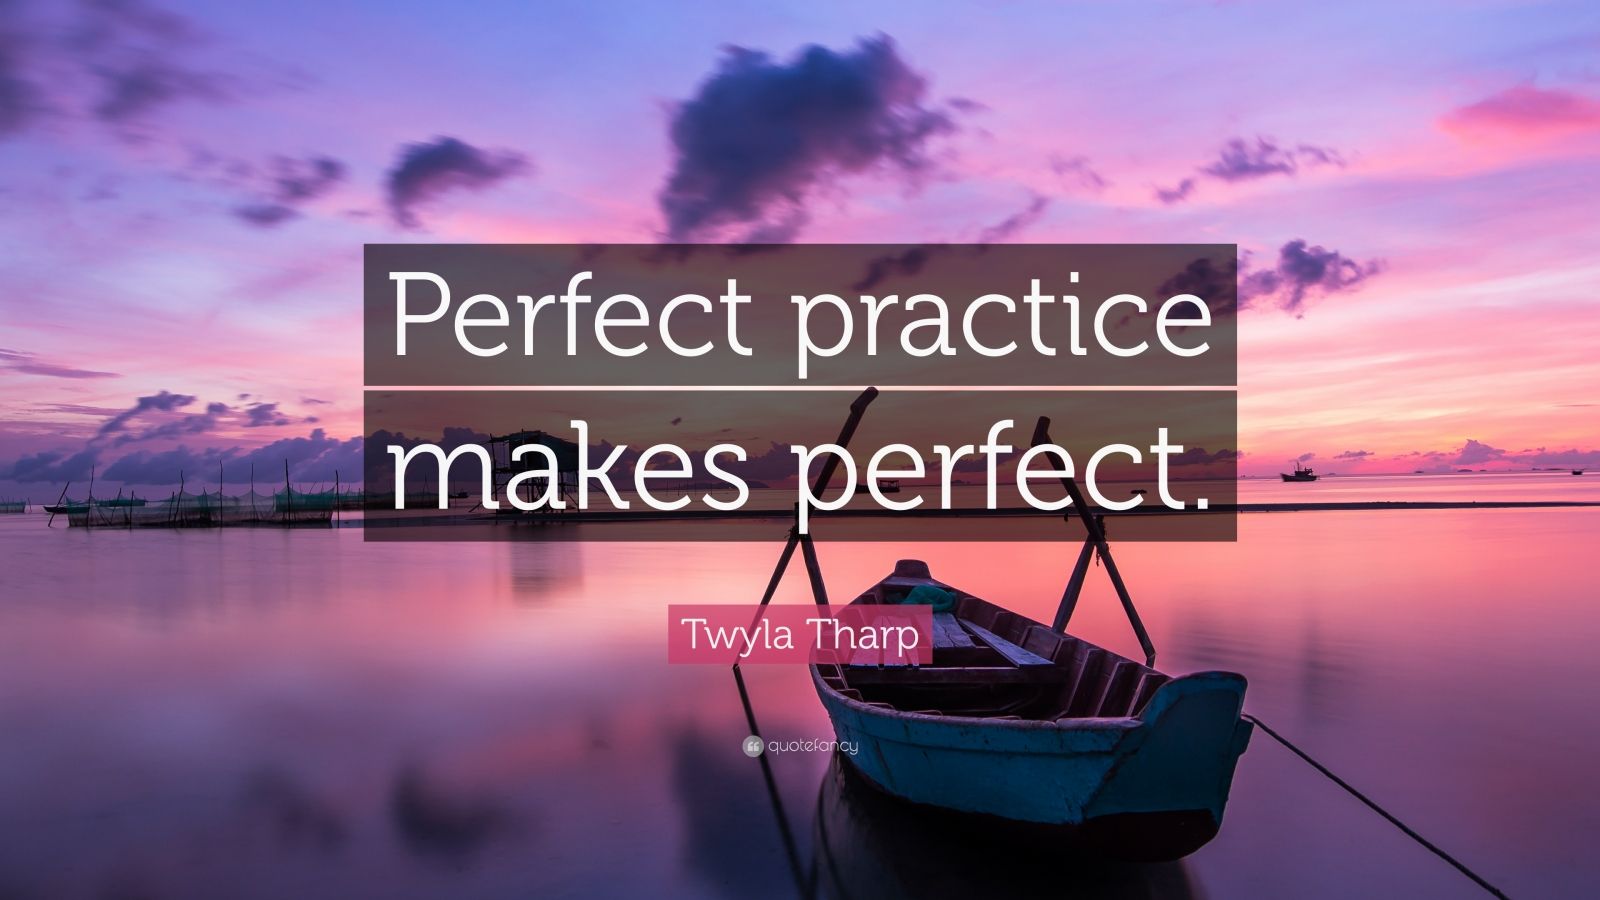 Twyla Tharp Quote: “Perfect practice makes perfect.” (7 wallpapers